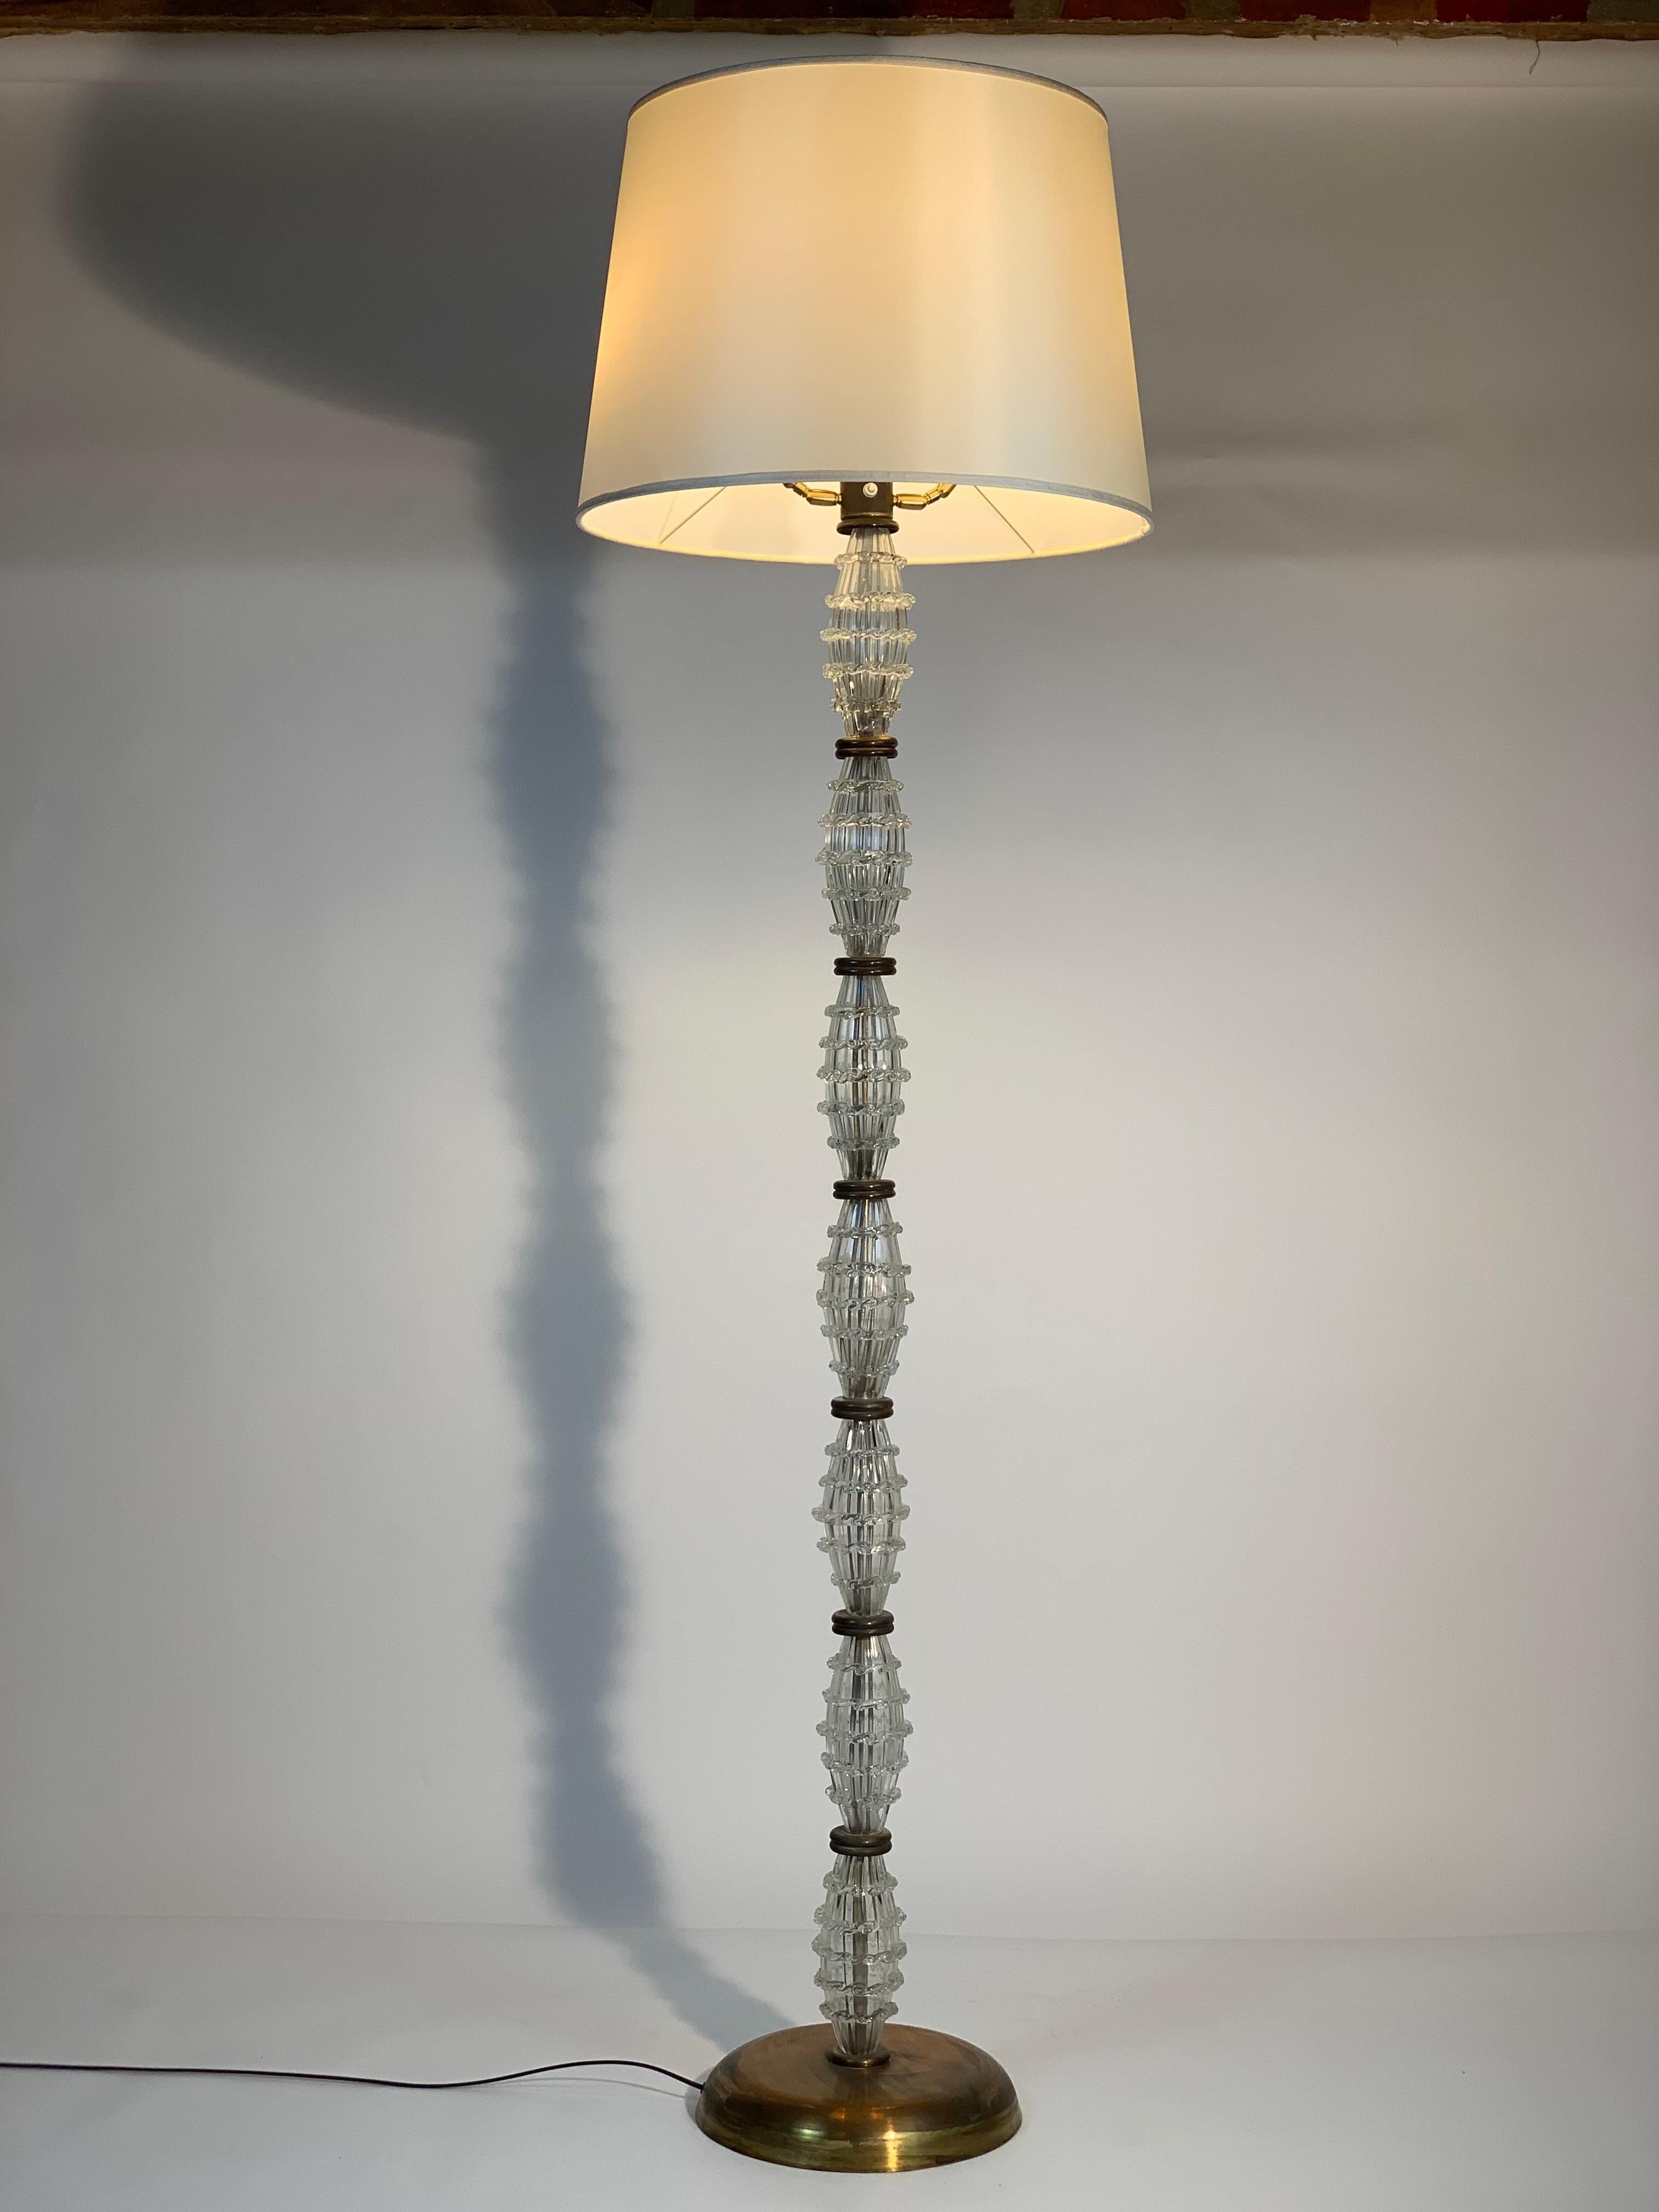 Murano glass floor lamp made up of blown glass segments with 